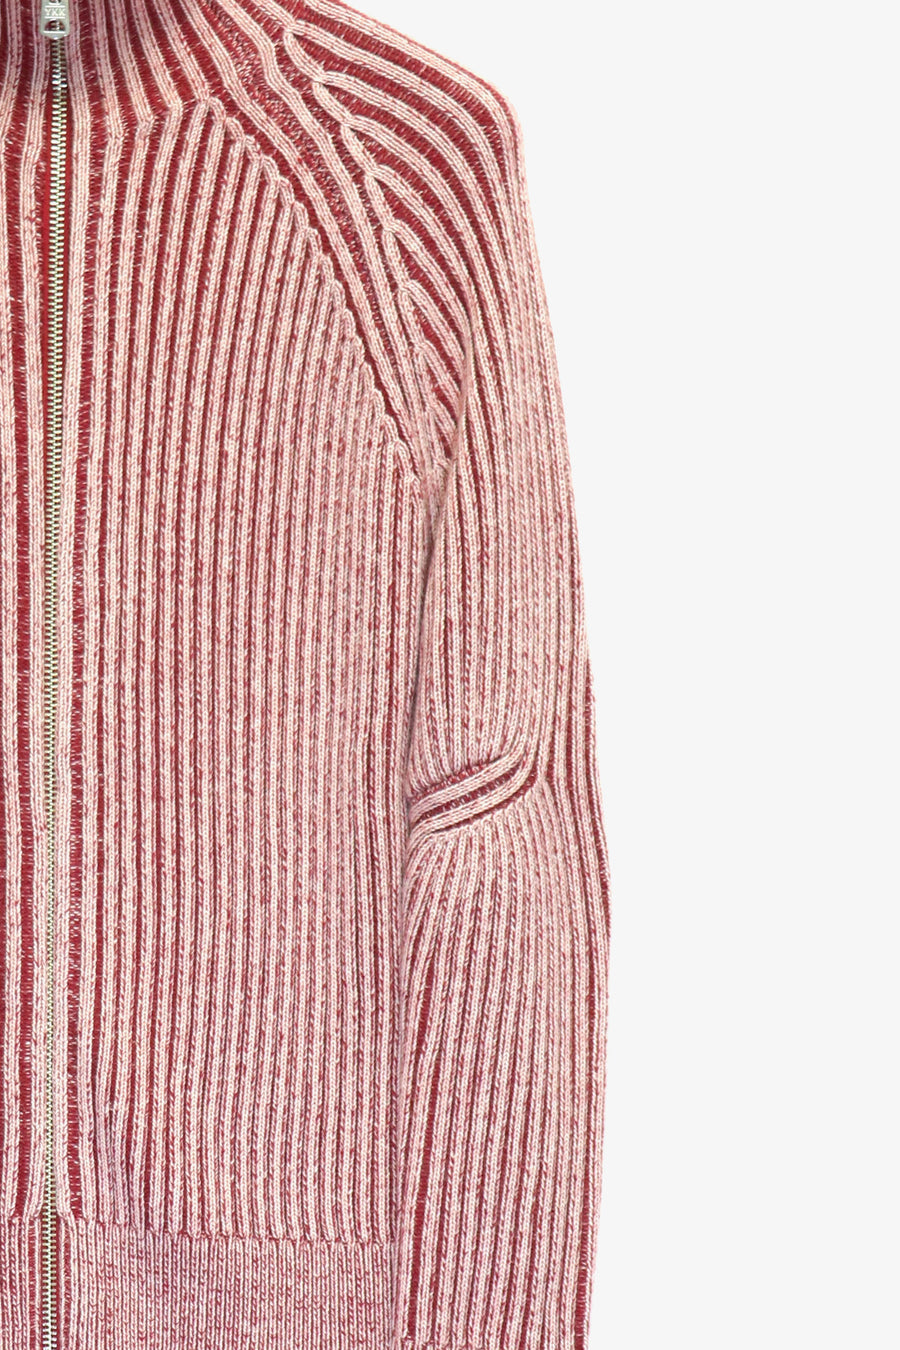 Voltage Control Filter  Wool Rib Drivers Knit(RED)